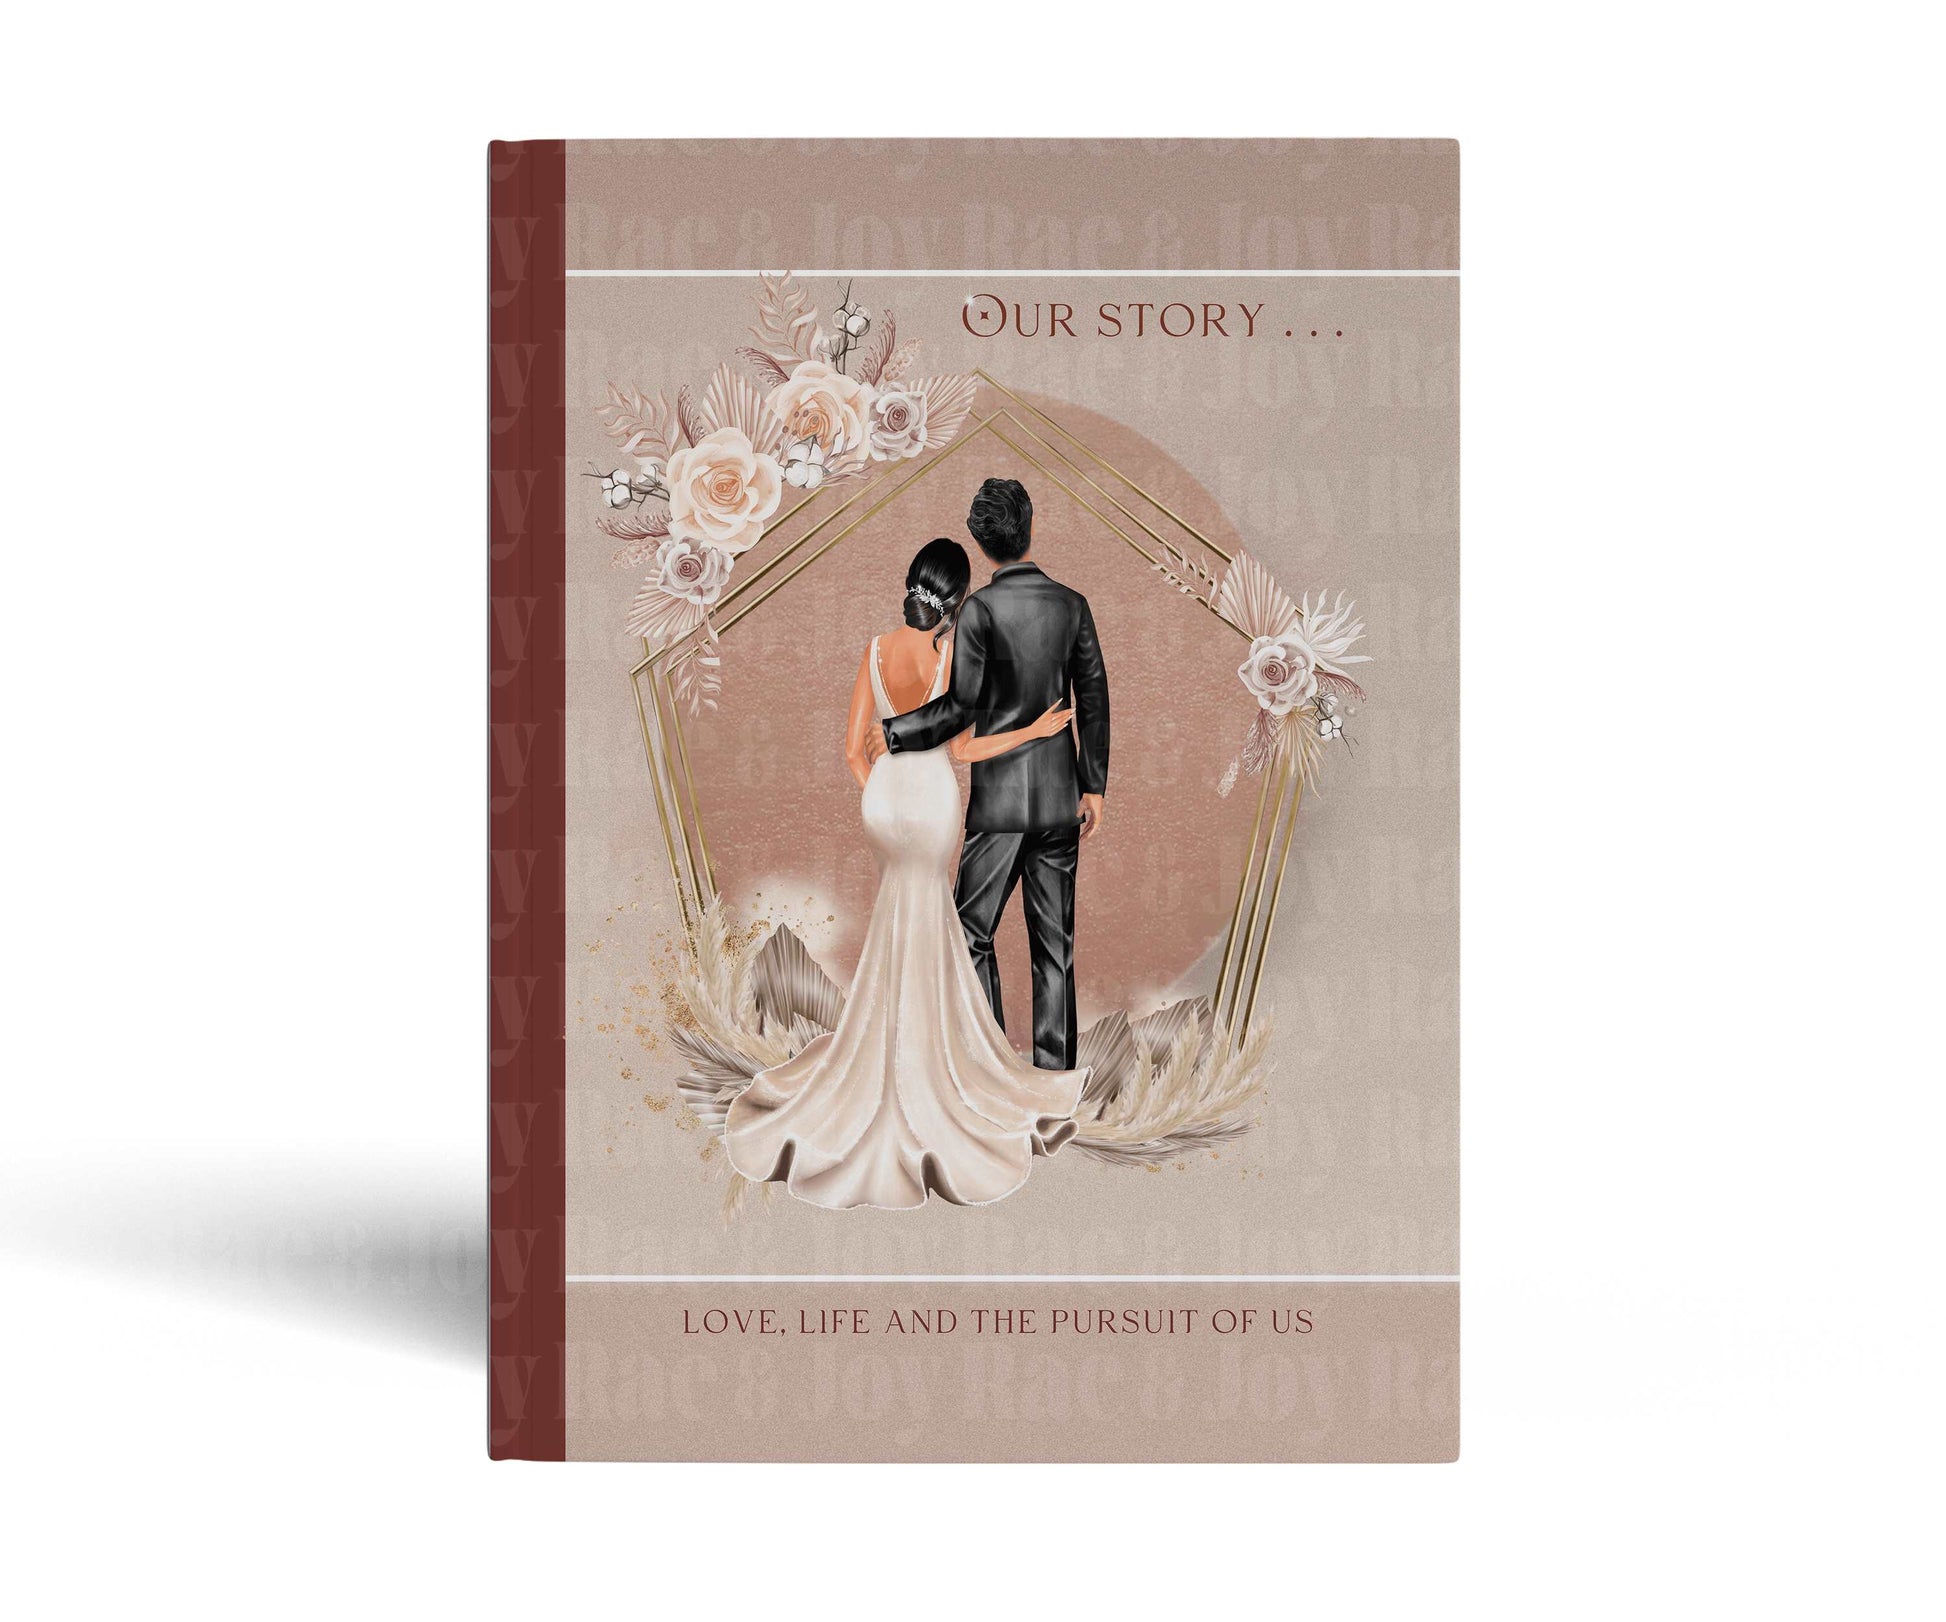 OUR LOVE STORY Relationship Journal: The perfect gift to keep love &  romance alive! A bedside ritual for Lovers - We lovingly make entries as  this  lovers, partners, best friends 